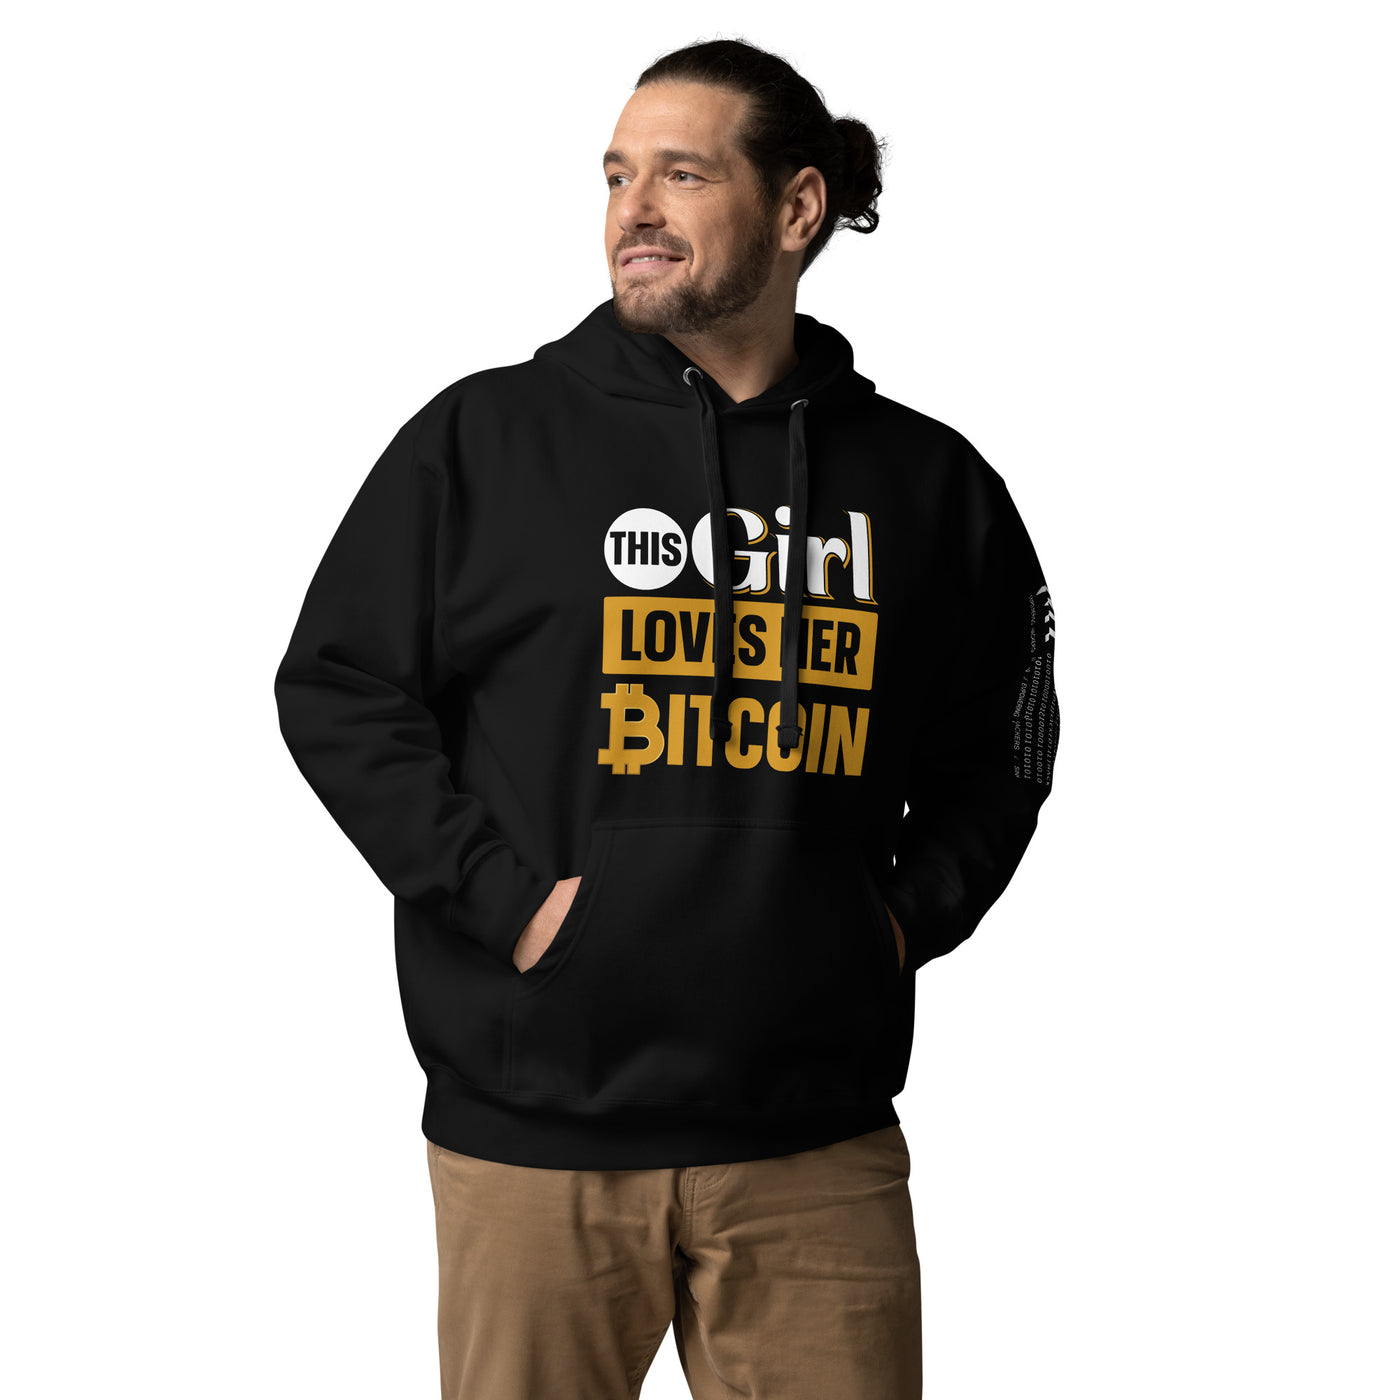 This Girl love her Bitcoin Unisex Hoodie